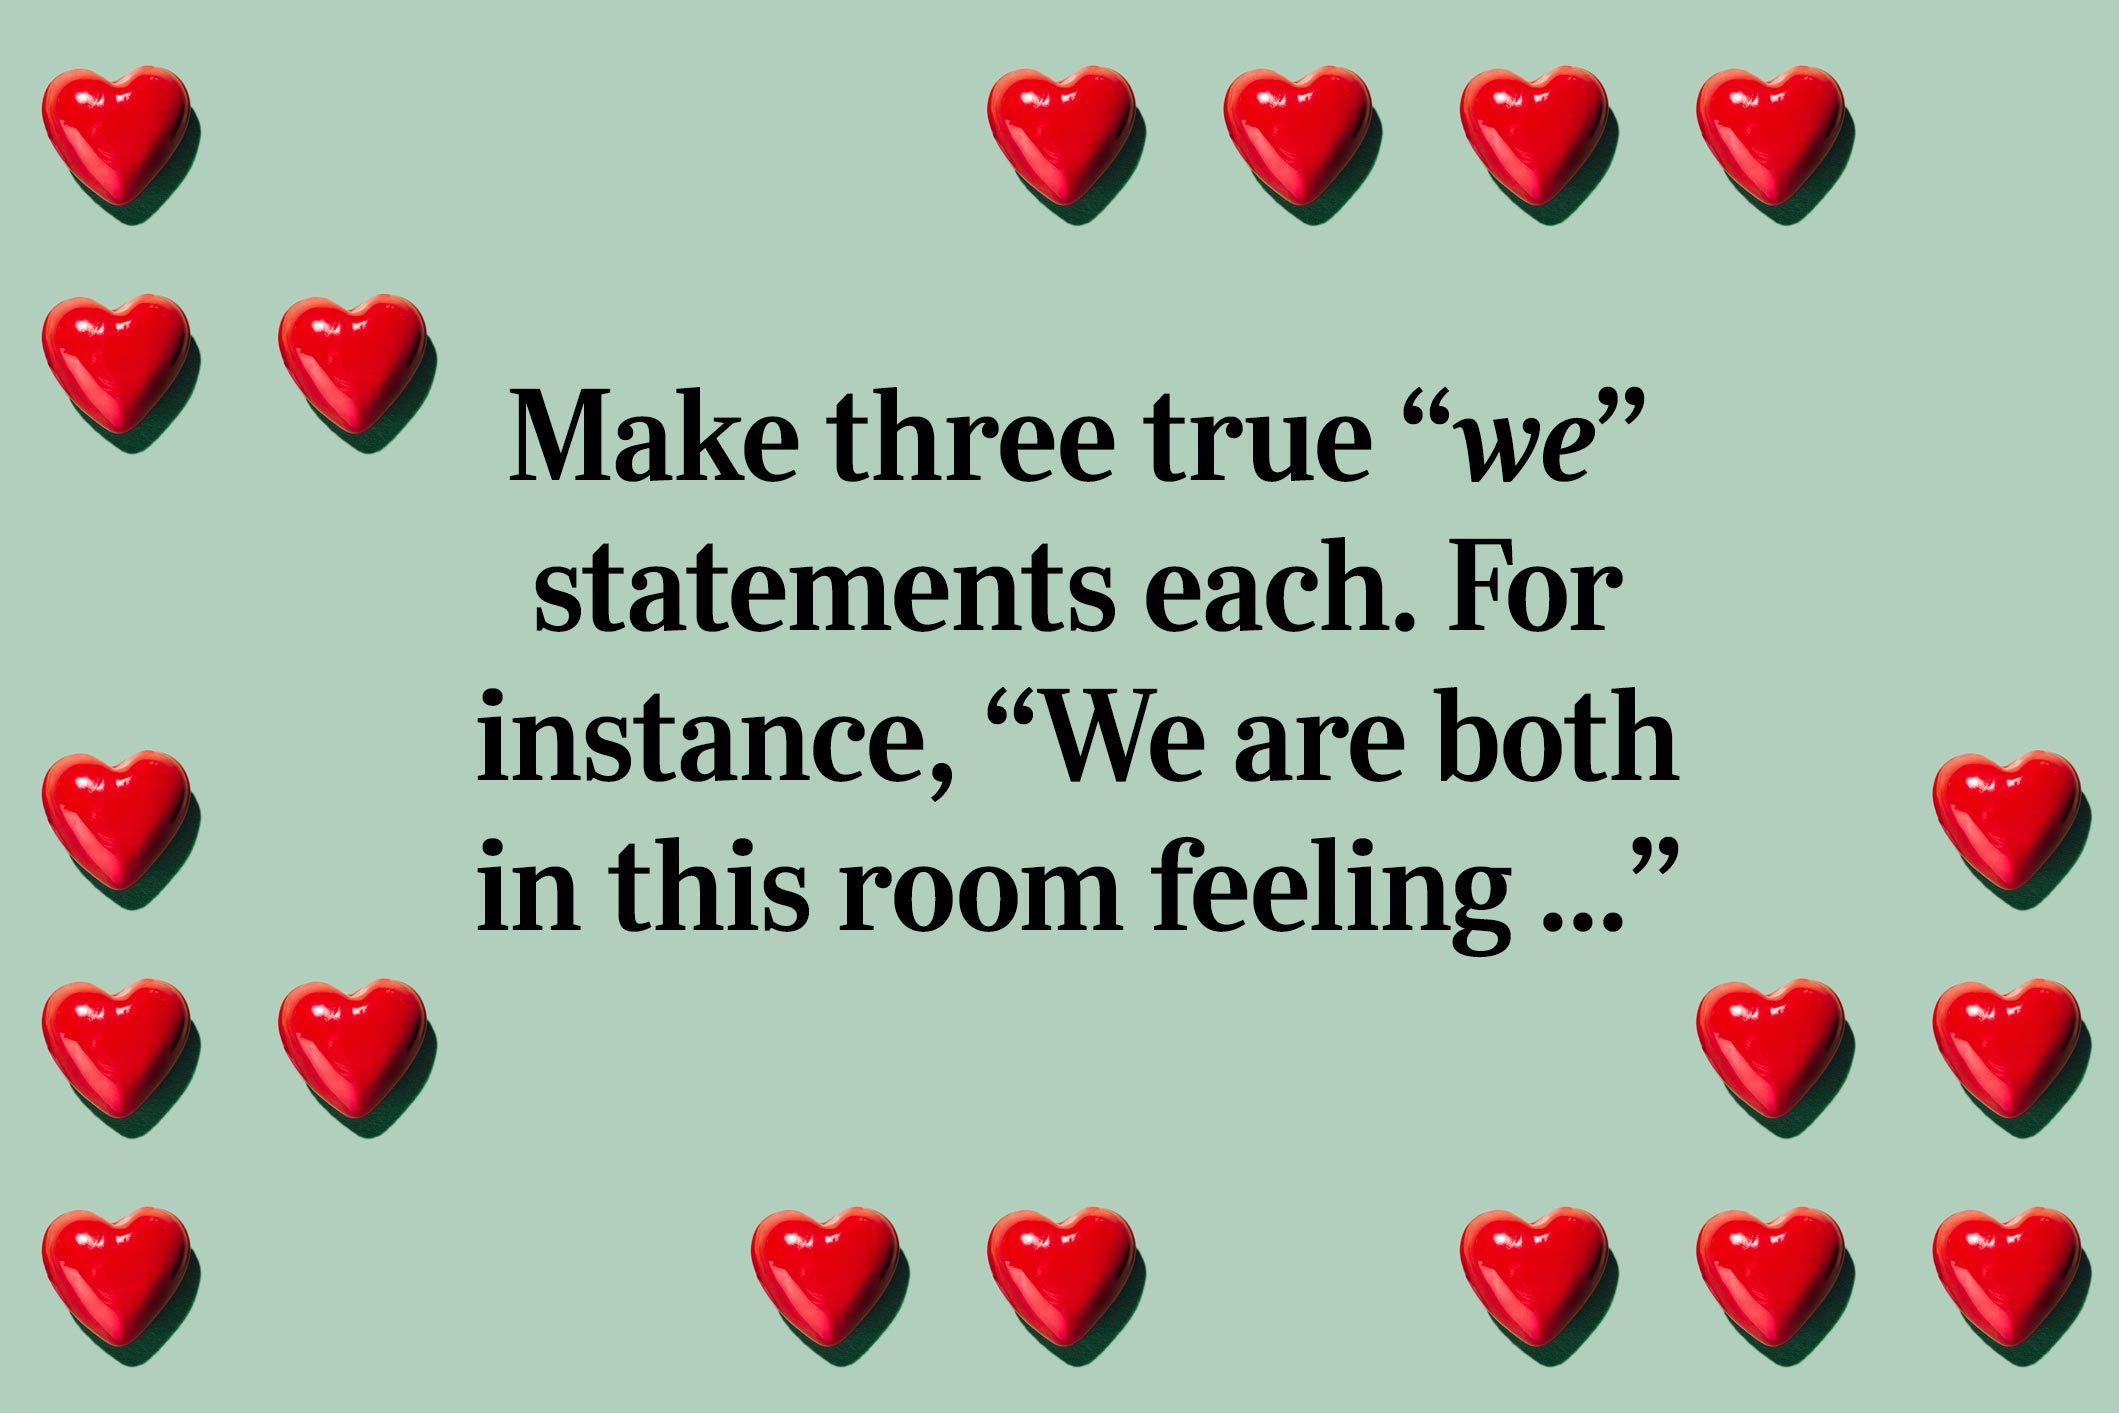 <p>Make three true “we” statements each. For instance, “We are both in this room feeling ..."</p>